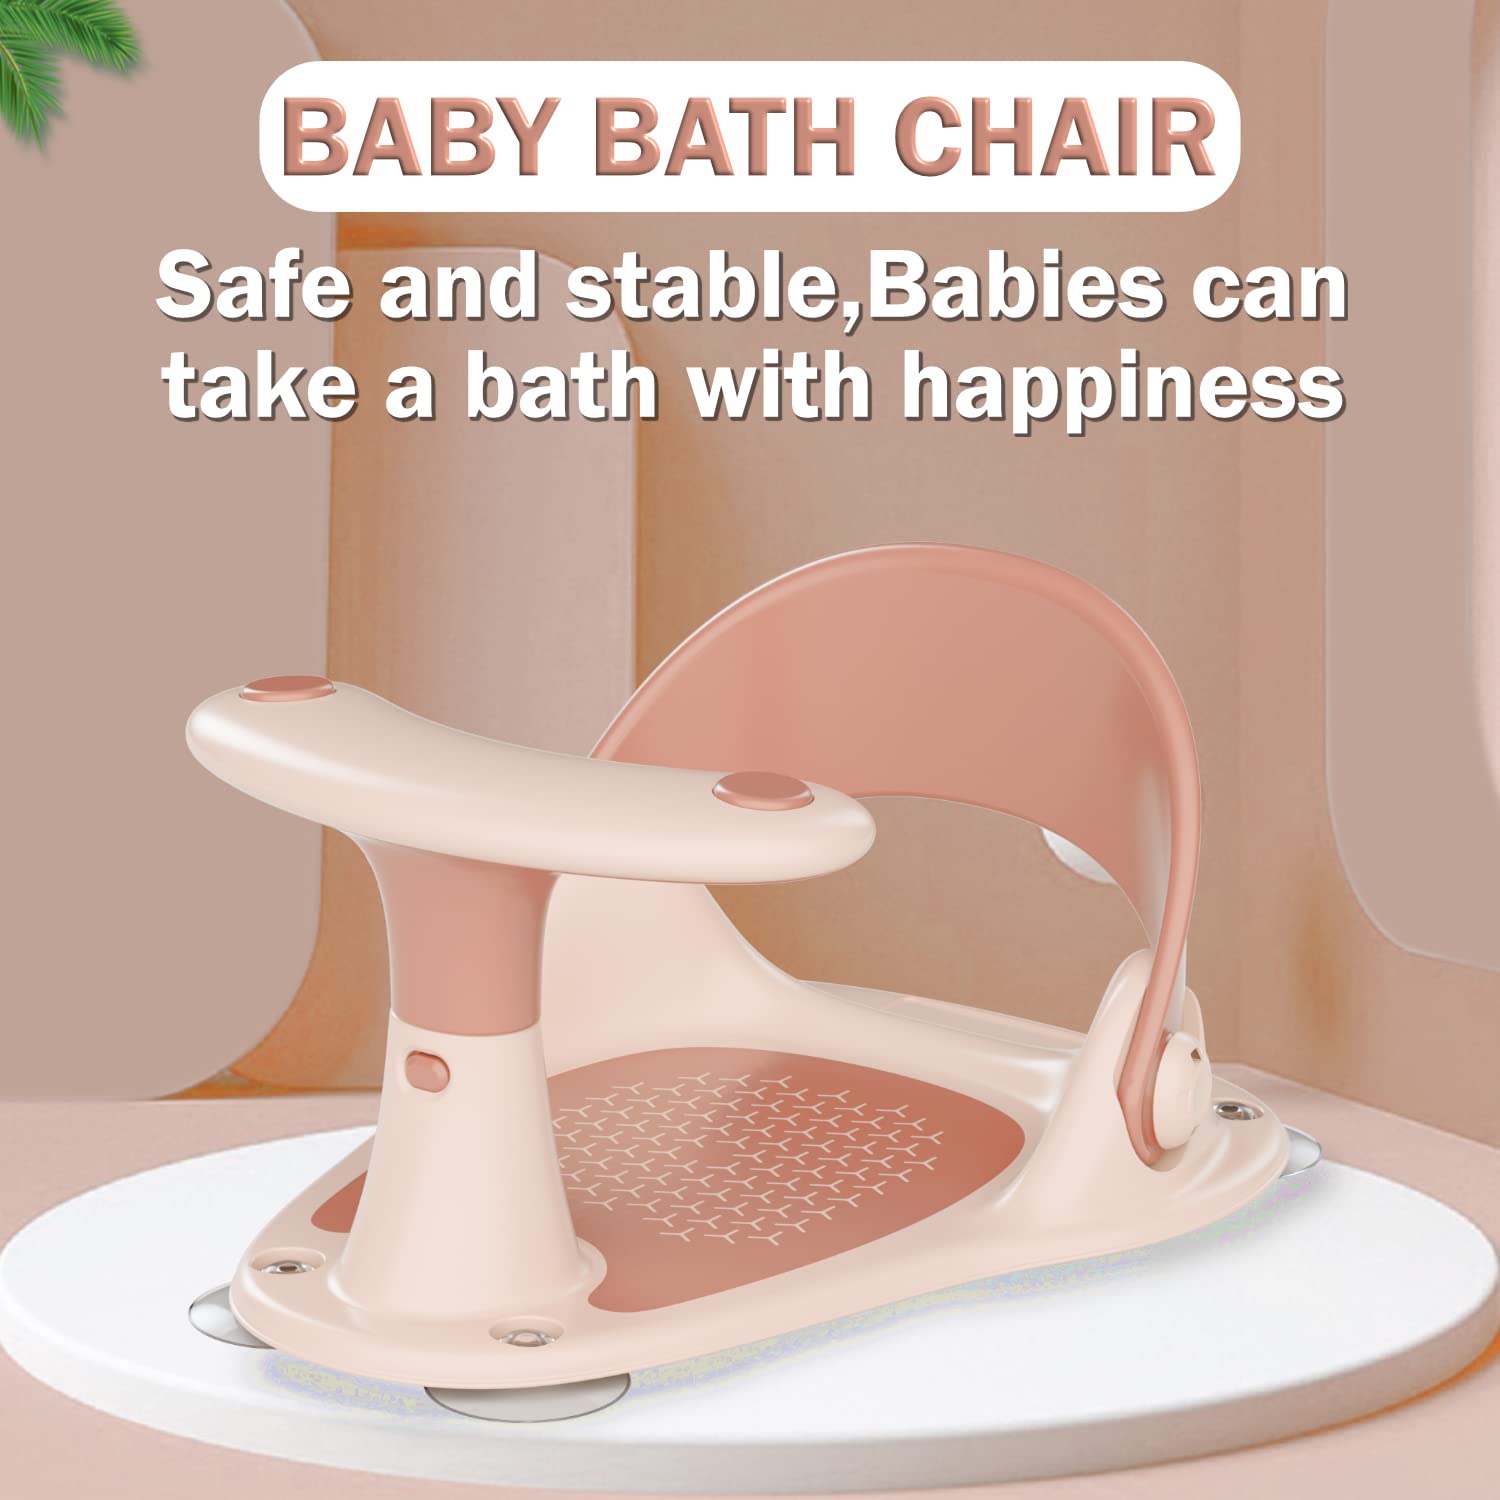 Baby Bath Seat,Baby Bathtub Seat for 6 Months & Up, Infant Bath Seat with Non-Slip Toddler Bath Seat TOPMINO